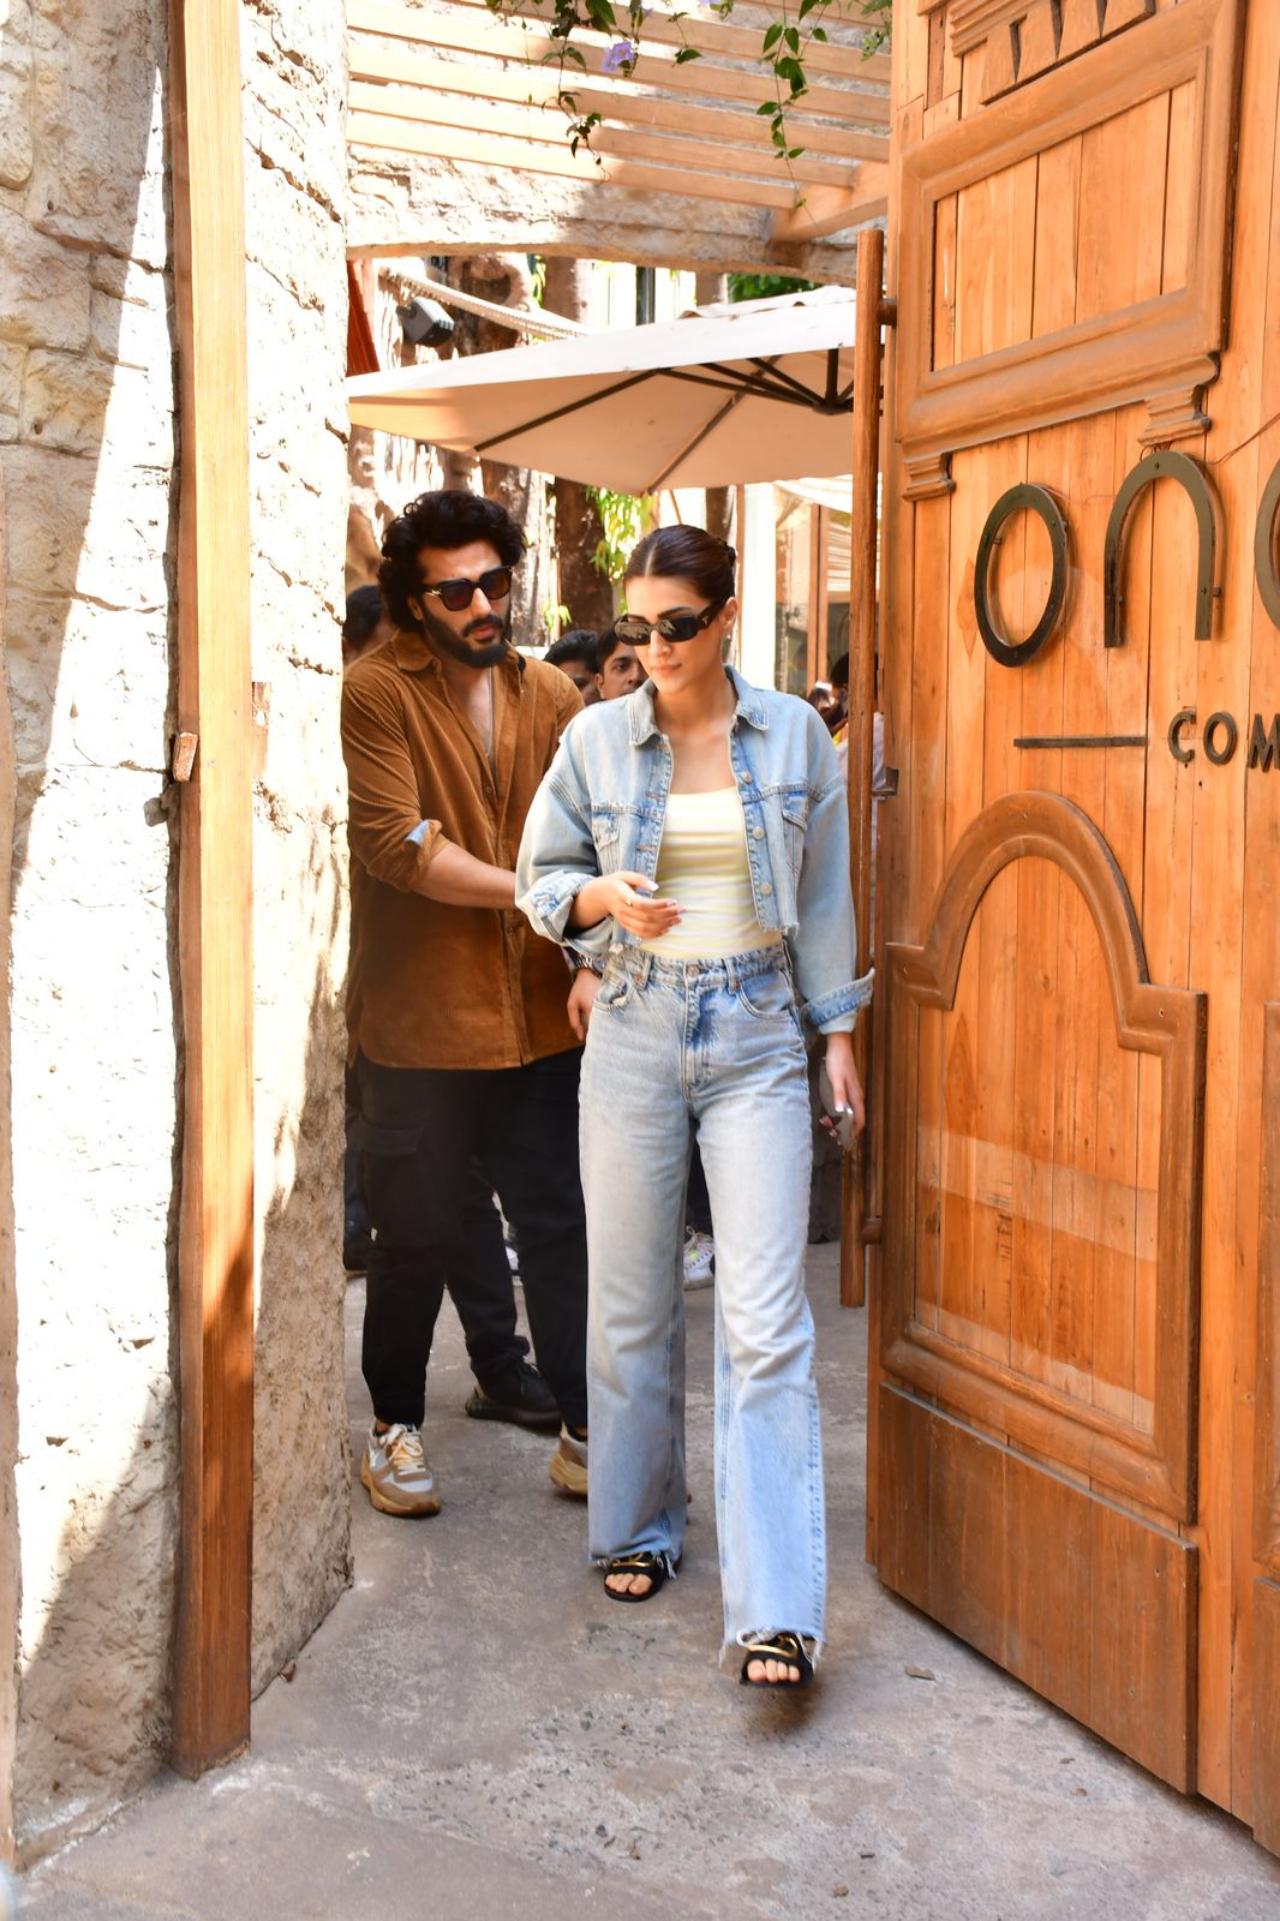 Arjun Kapoor and Kriti Sanon were spotted together at a restaurant in Bandra. Kriti is slaying in her double denim look!